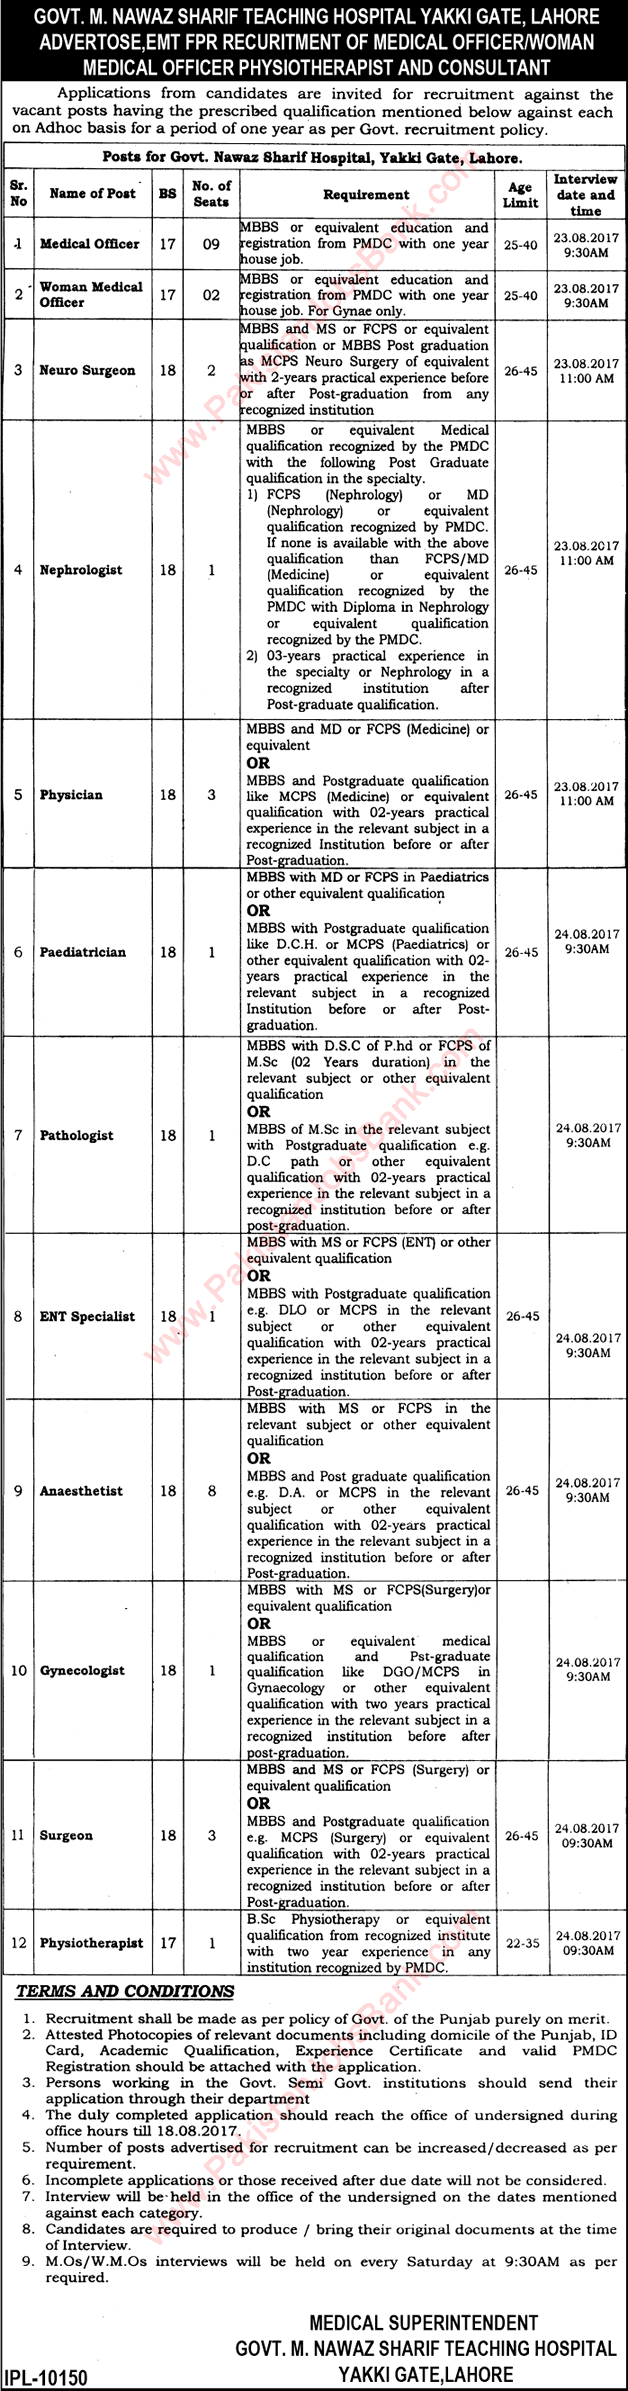 Government Nawaz Sharif Hospital Lahore Jobs August 2017 Medical Officers, Specialist Doctors & Physiotherapist Latest